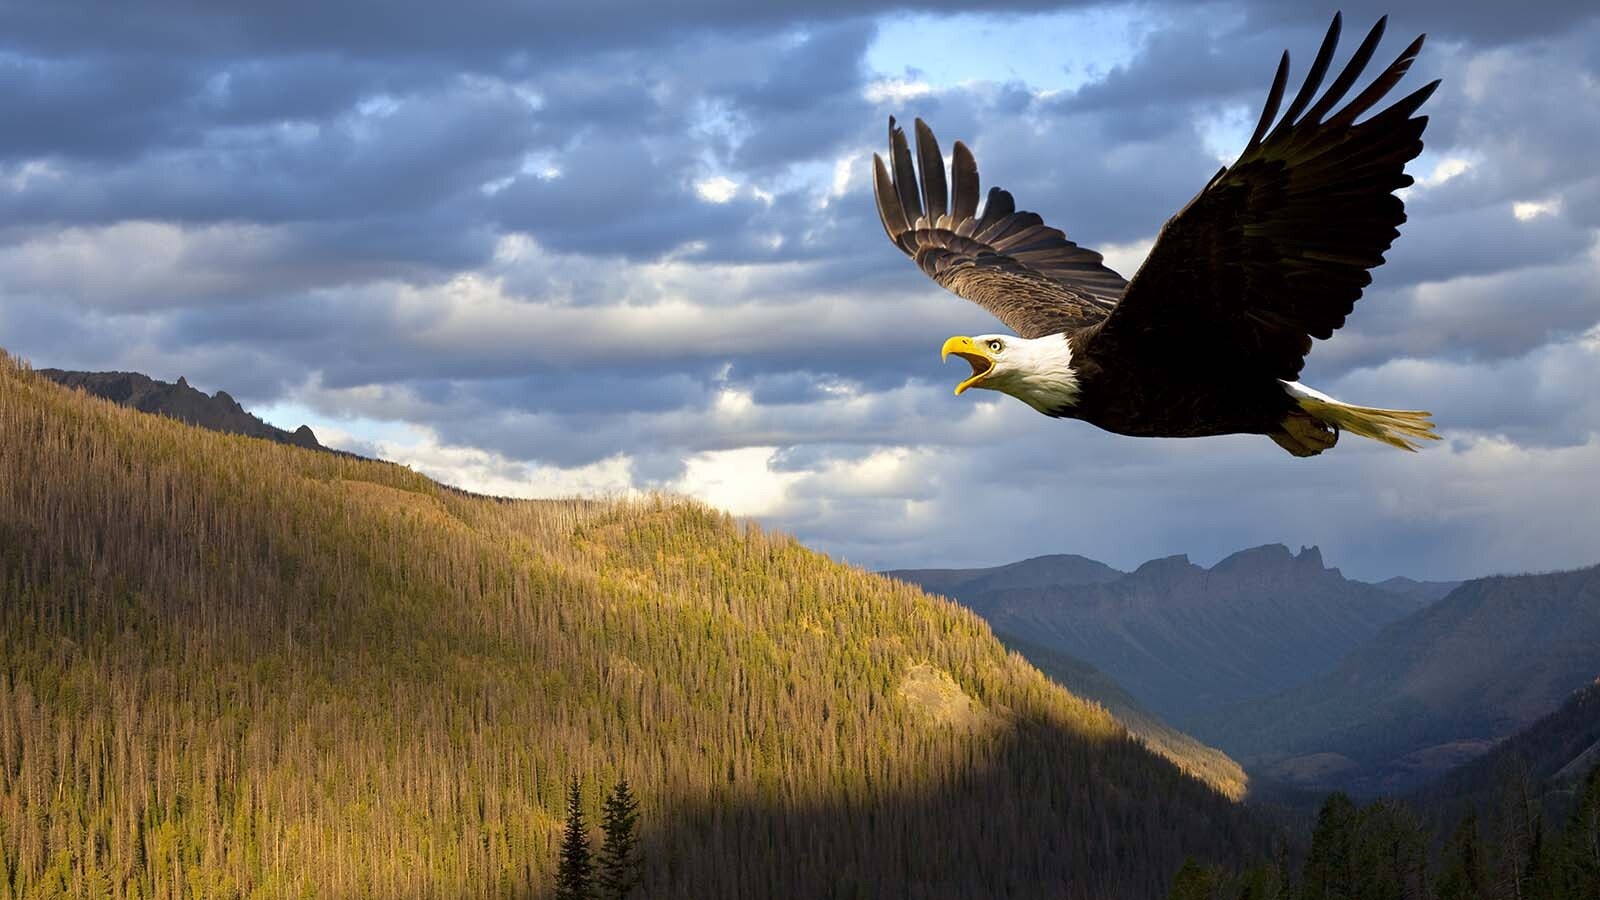 A bald eagle soars over the Wyoming landscape.